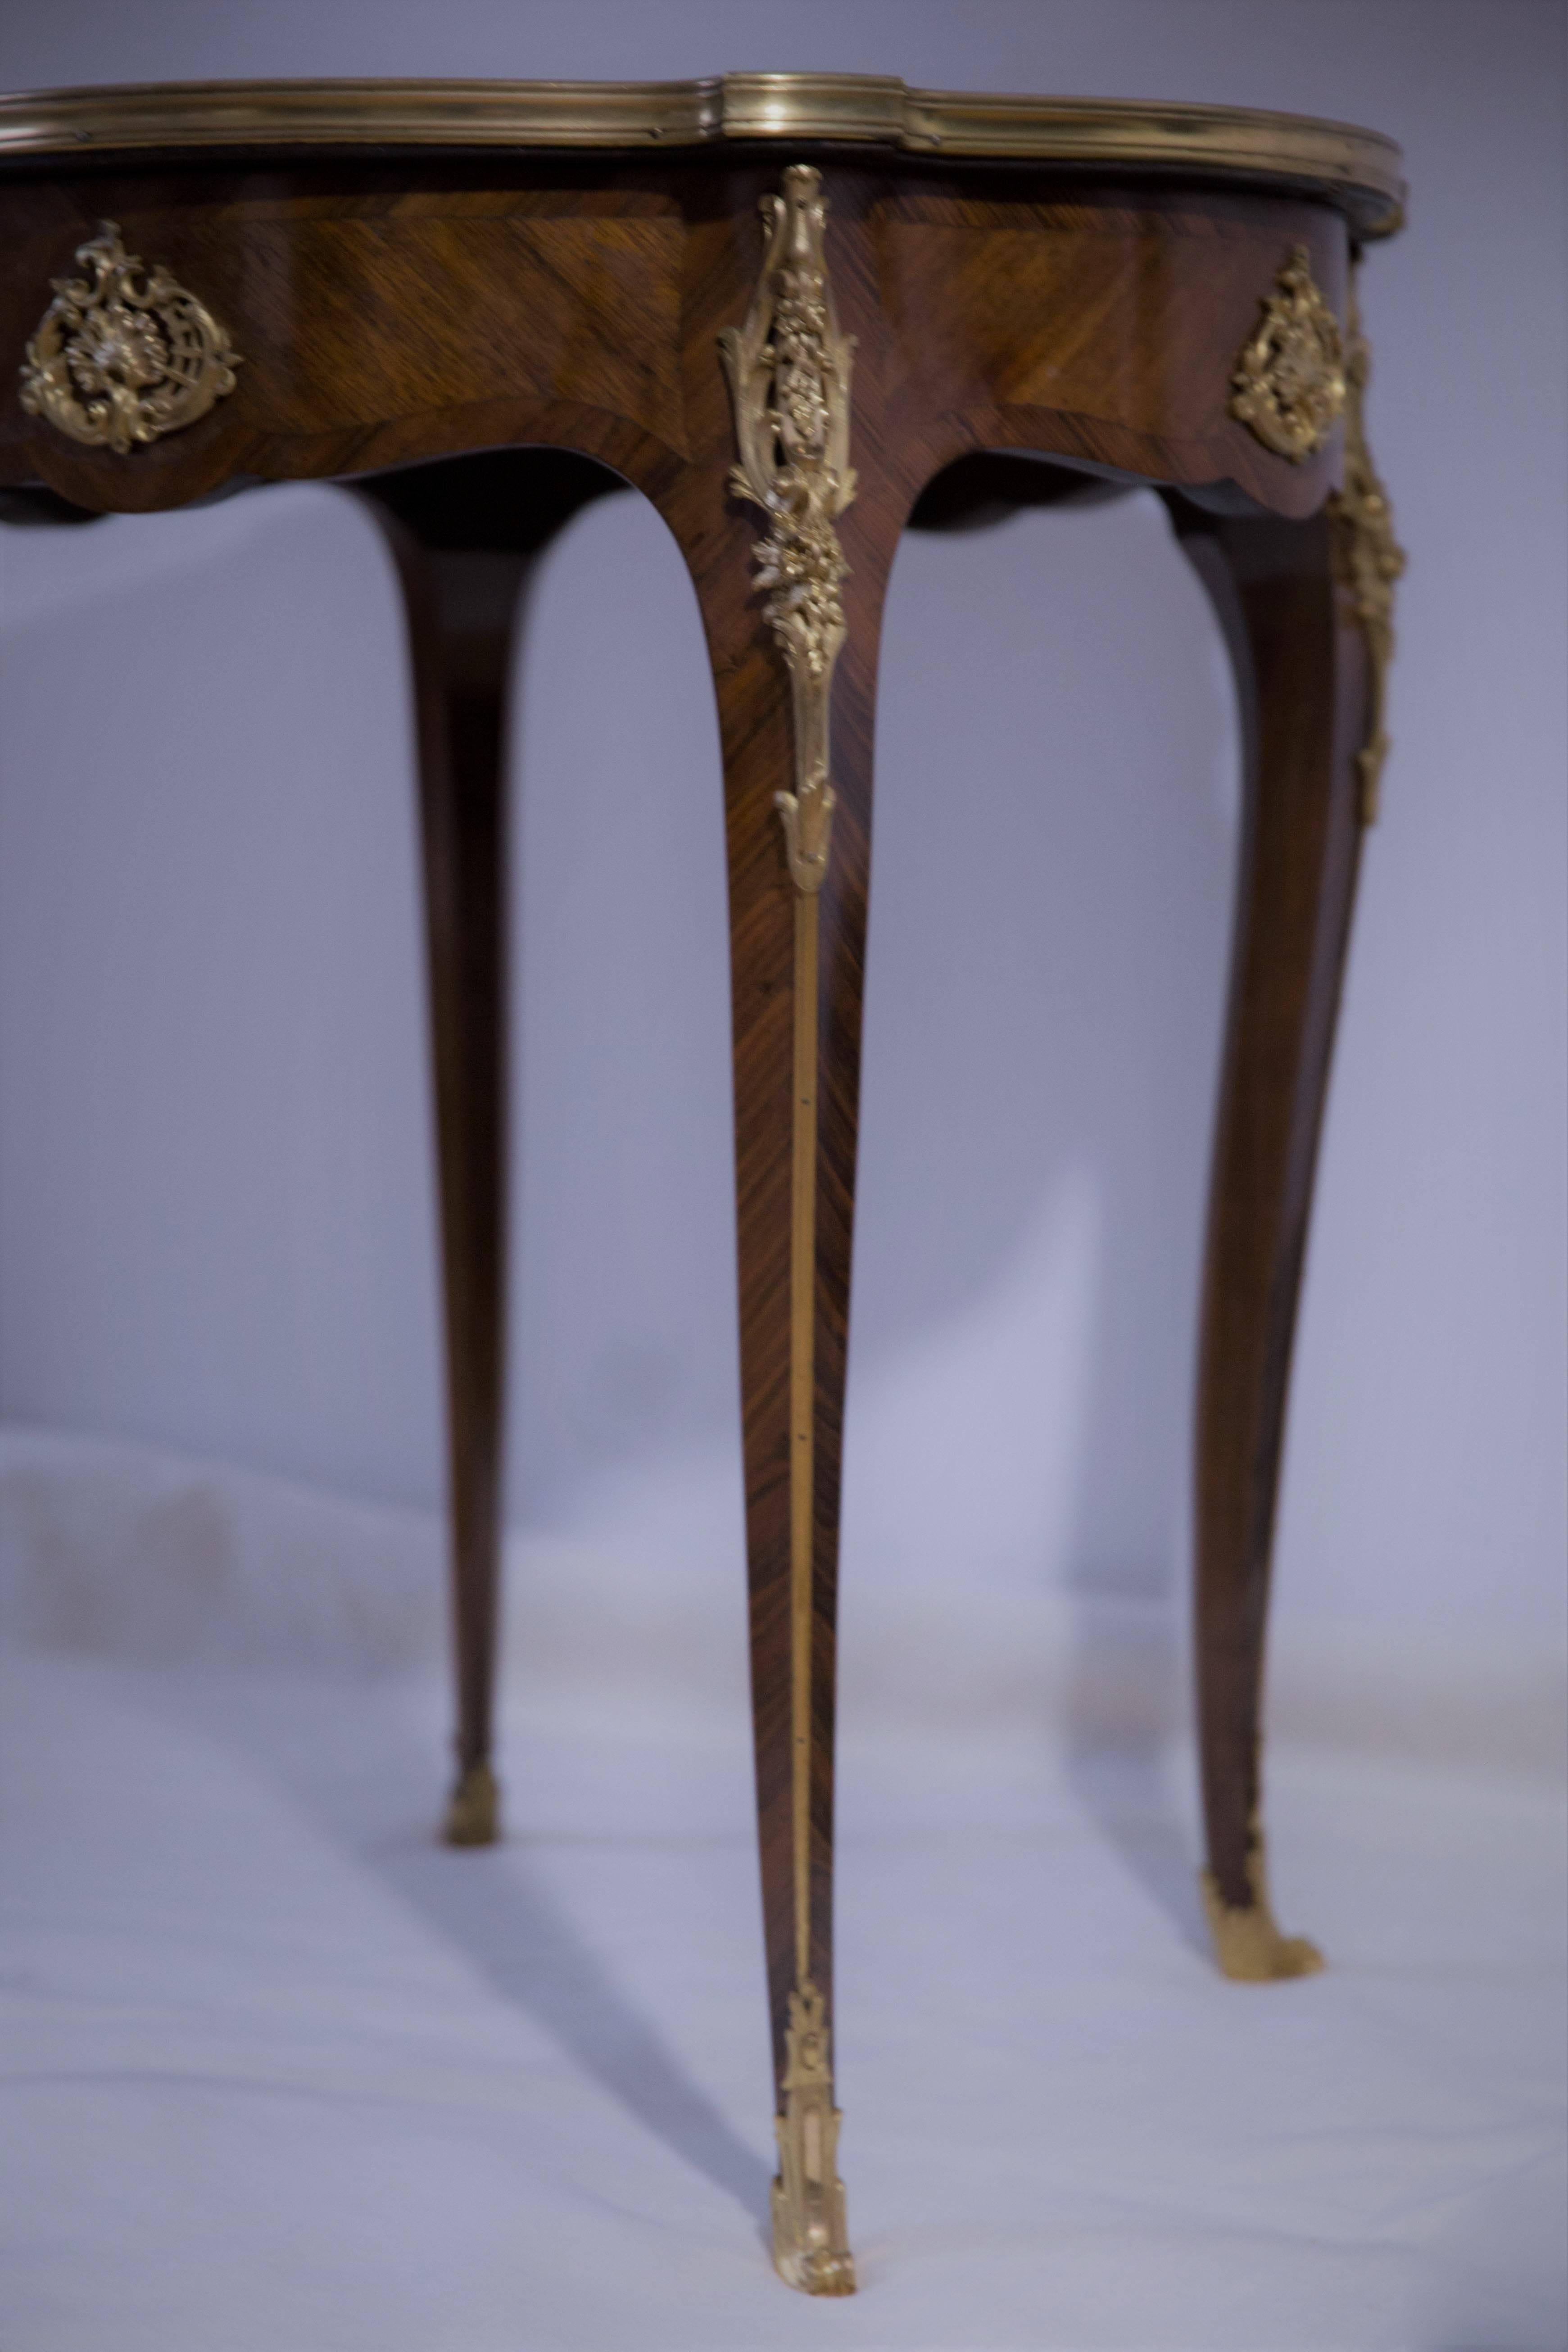 A fine and elegant Guéridon side table, France, second half of 19th century, in the Rococo Revival Louis XVI style.
Crossbanded rosewood veneer, very fine fire-gilded bronzes, and a Rosso Veneto marble top.
We restored the table, hand polished